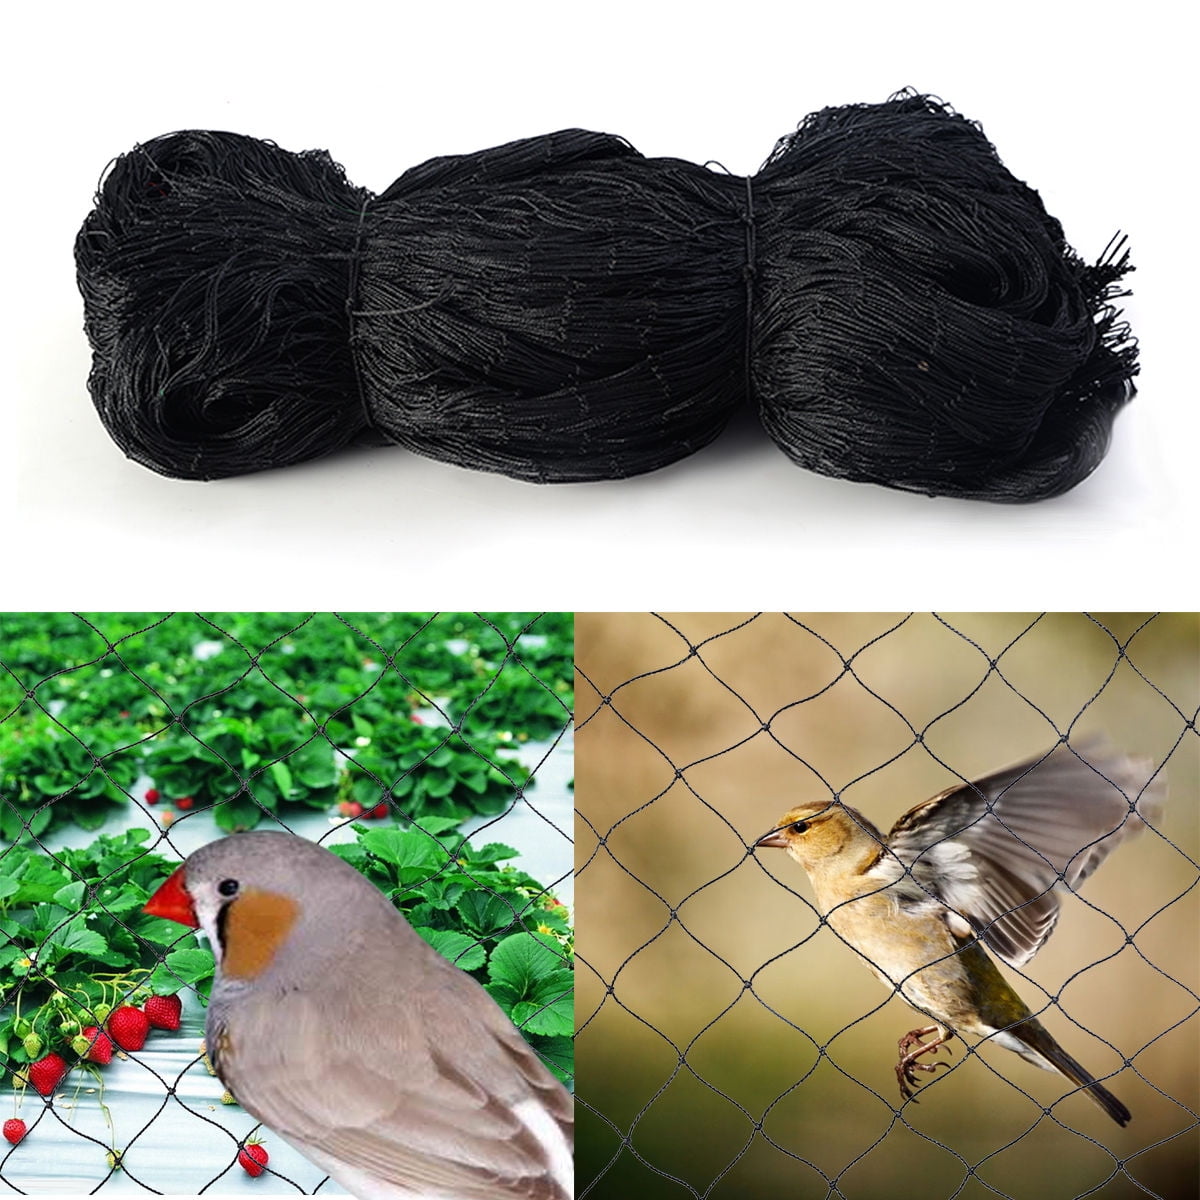 boknight Garden Netting Protect Plants and Fruit Trees Bird Netting Protection Against Birds Deer Poultry Netting 2x 2 Mesh 25' X 50' 